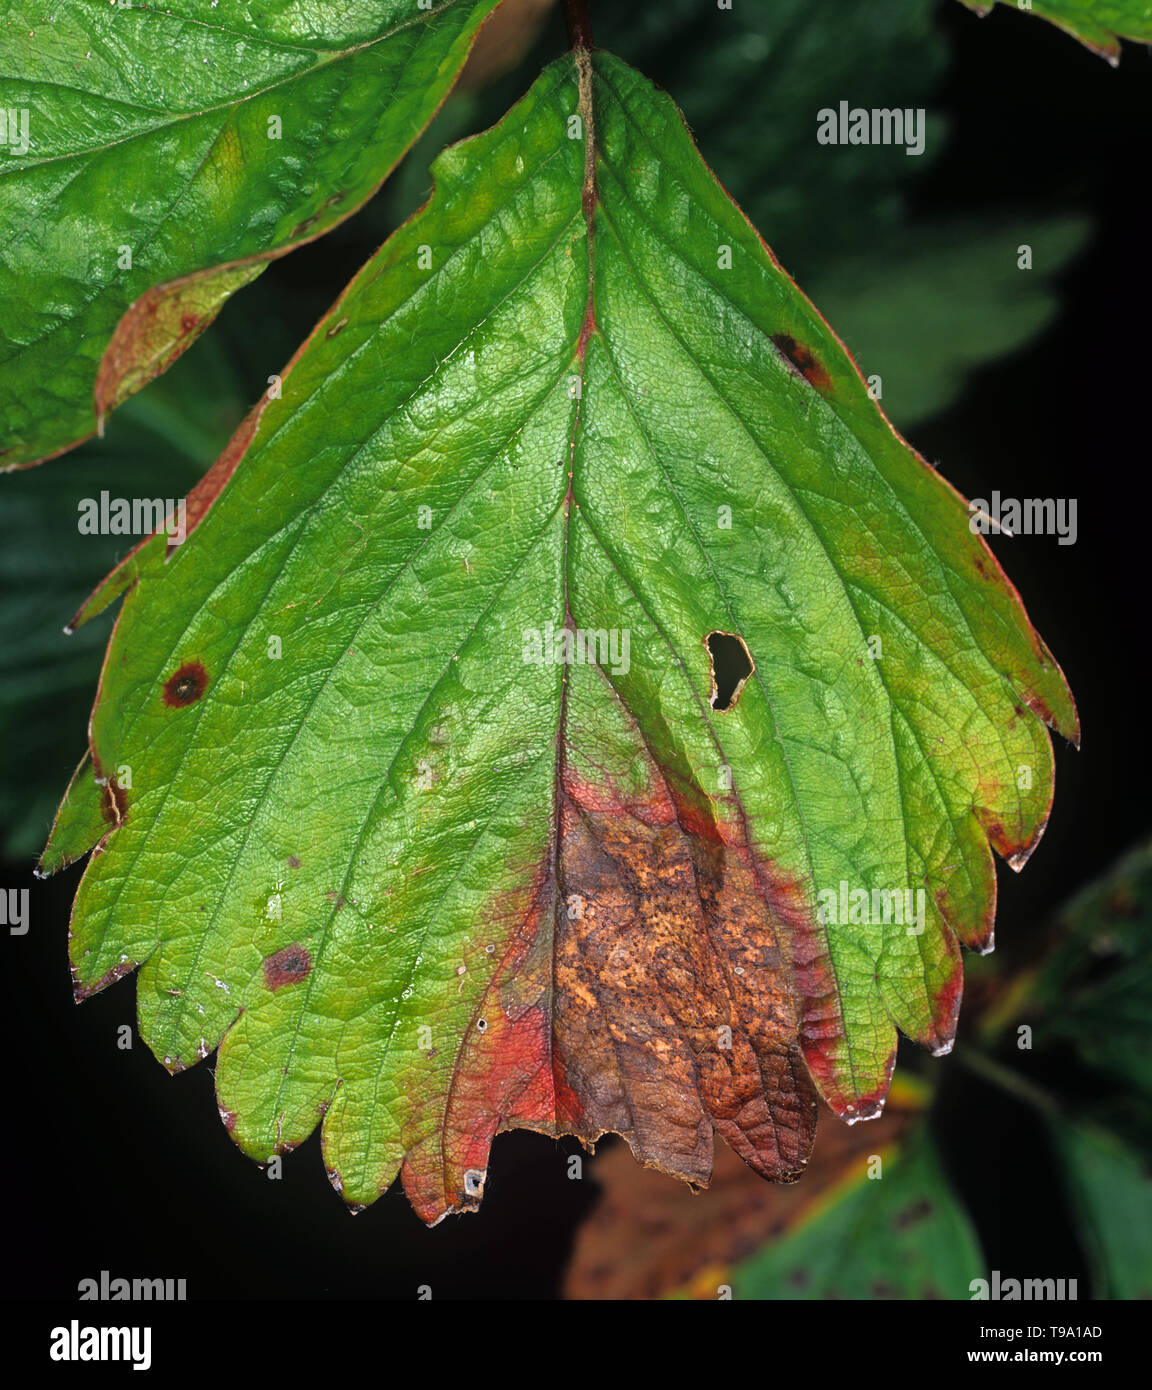 Leaf blight (Phomopsis obscurans)  common fungal disease causing a V-shaped lesion with pycnidia on a strawberry leaf Stock Photo